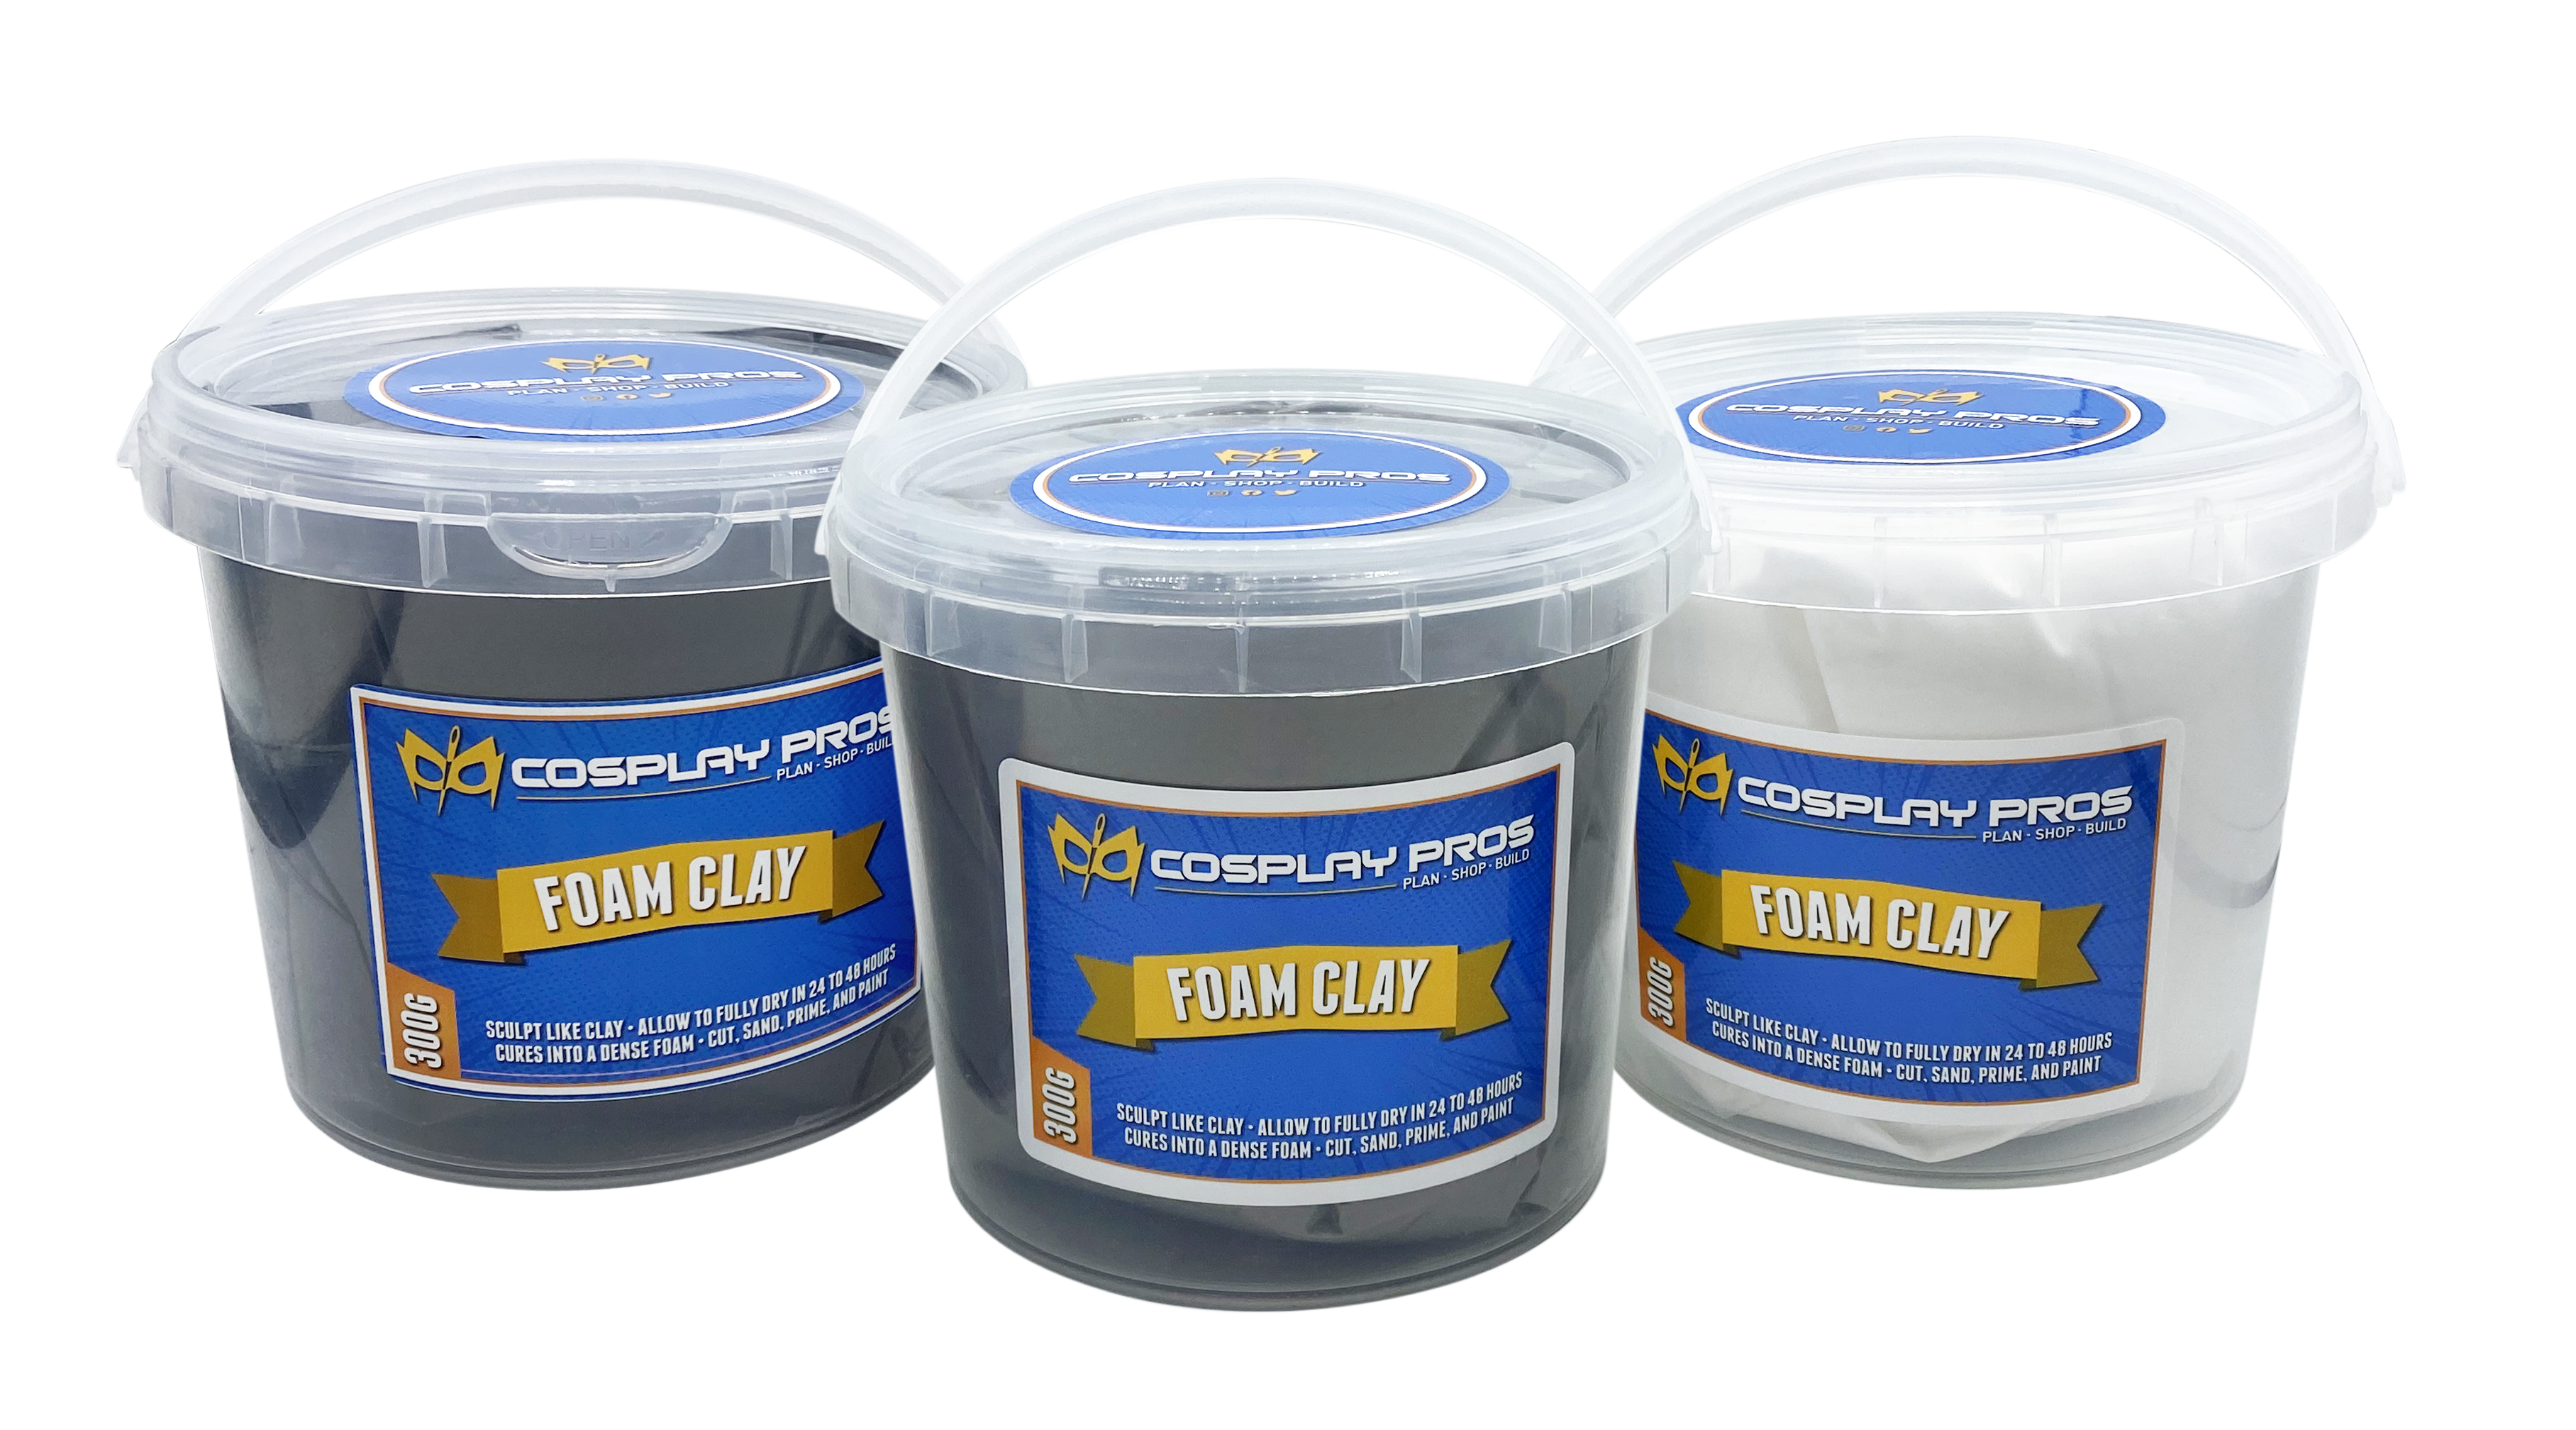  500g Cosplay Foam Clay,Lightweight Sculpting Foam, Air Dry Clay  for Cosplay and Costumes,Moldable Foam Clay for Intricate Designs, Cutting  or Rotary Tool, Sanding or Shaping (White) : Arts, Crafts & Sewing